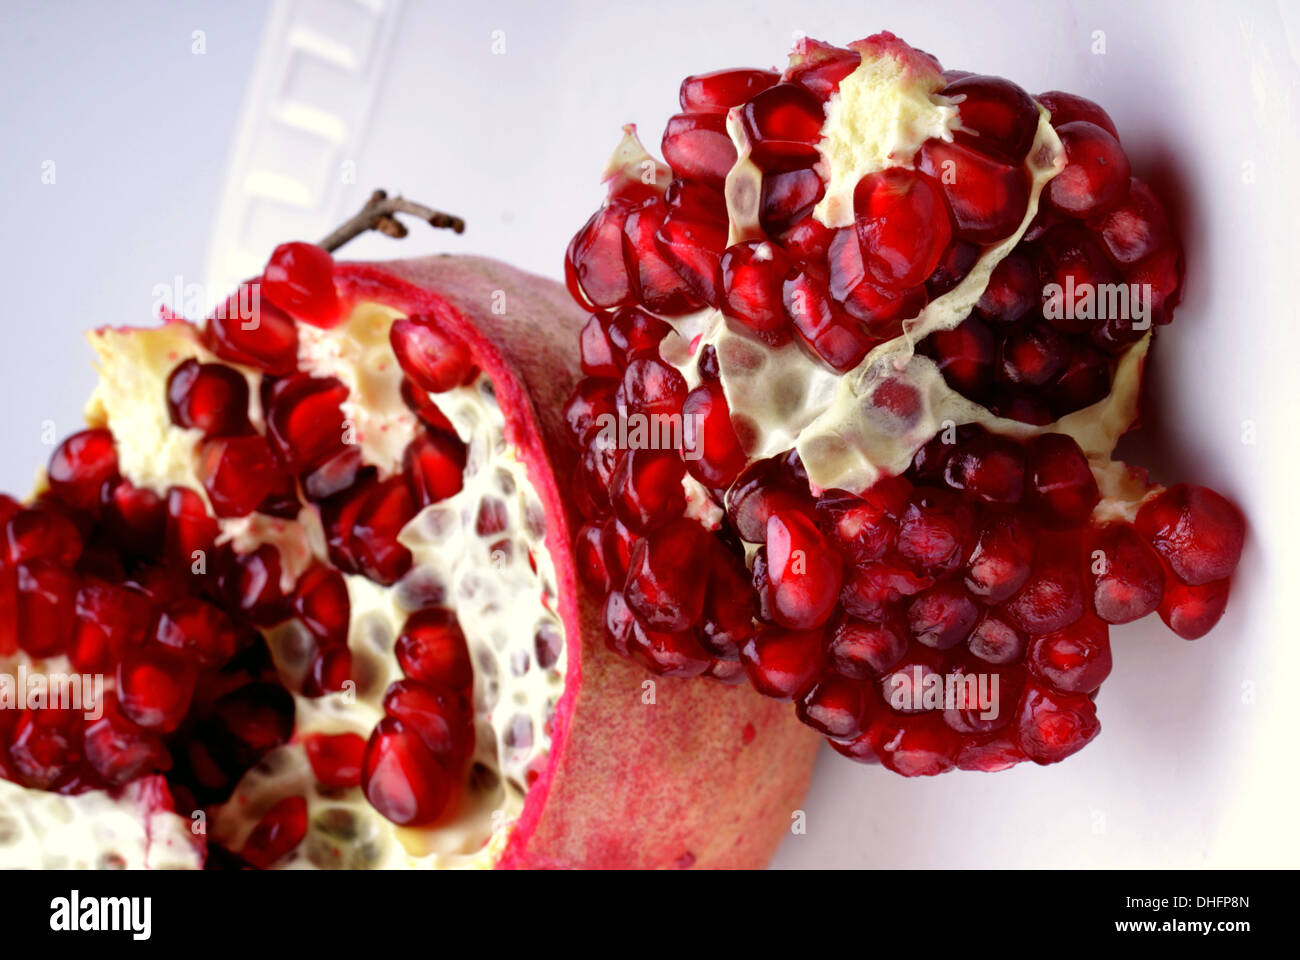 pomegranate on a background in studio Stock Photo